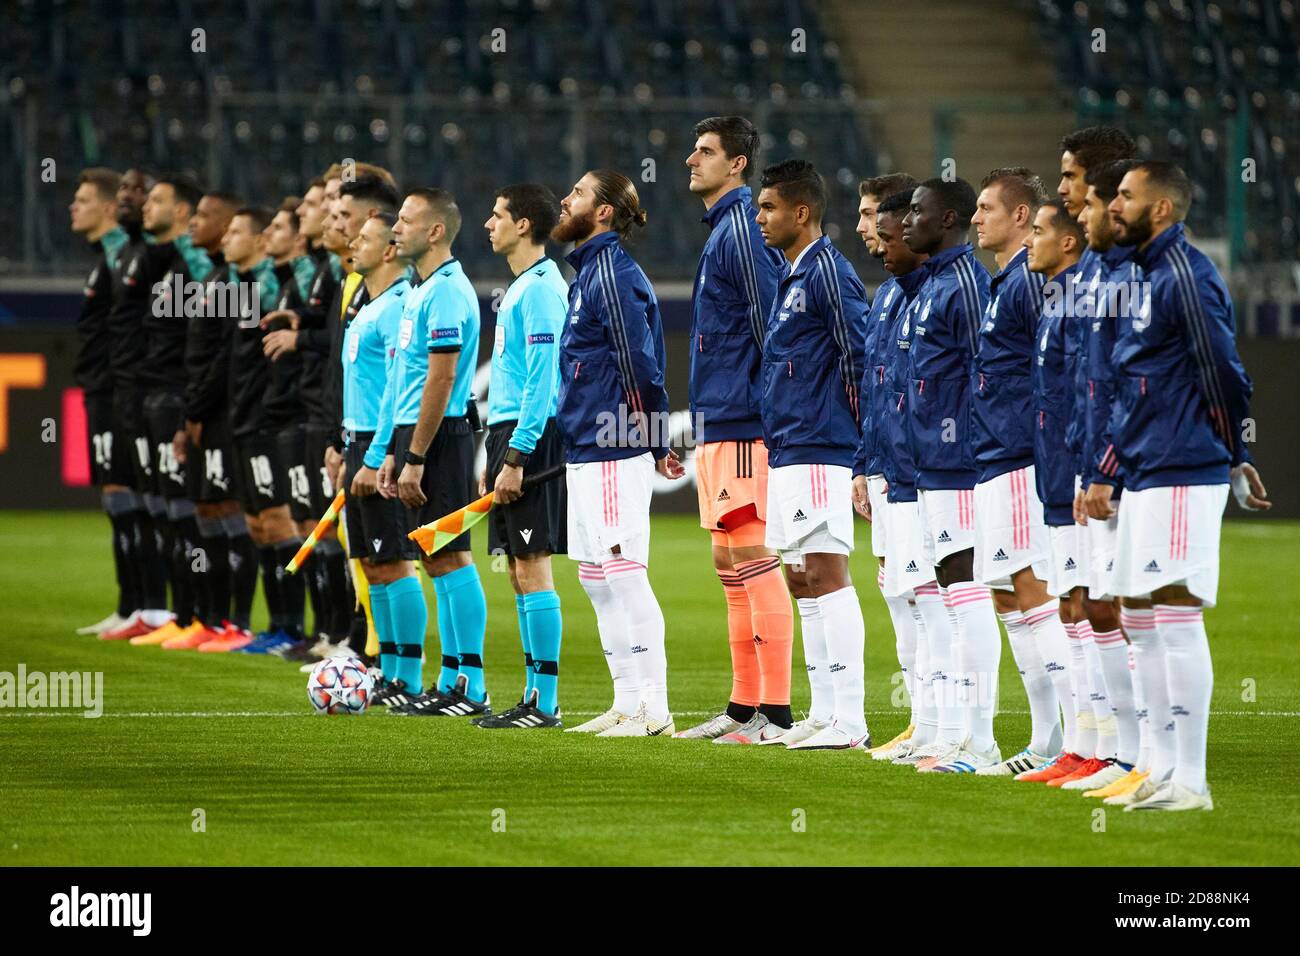 Monchengladbach, Germany. 27th Oct, 2020. Players before the UEFA Champions League match between Borussia Monchengladbach and Real Madrid at Borussia-Park on October 27, 2020 in Monchengladbach, Spain. Credit: Dax Images/Alamy Live News Stock Photo